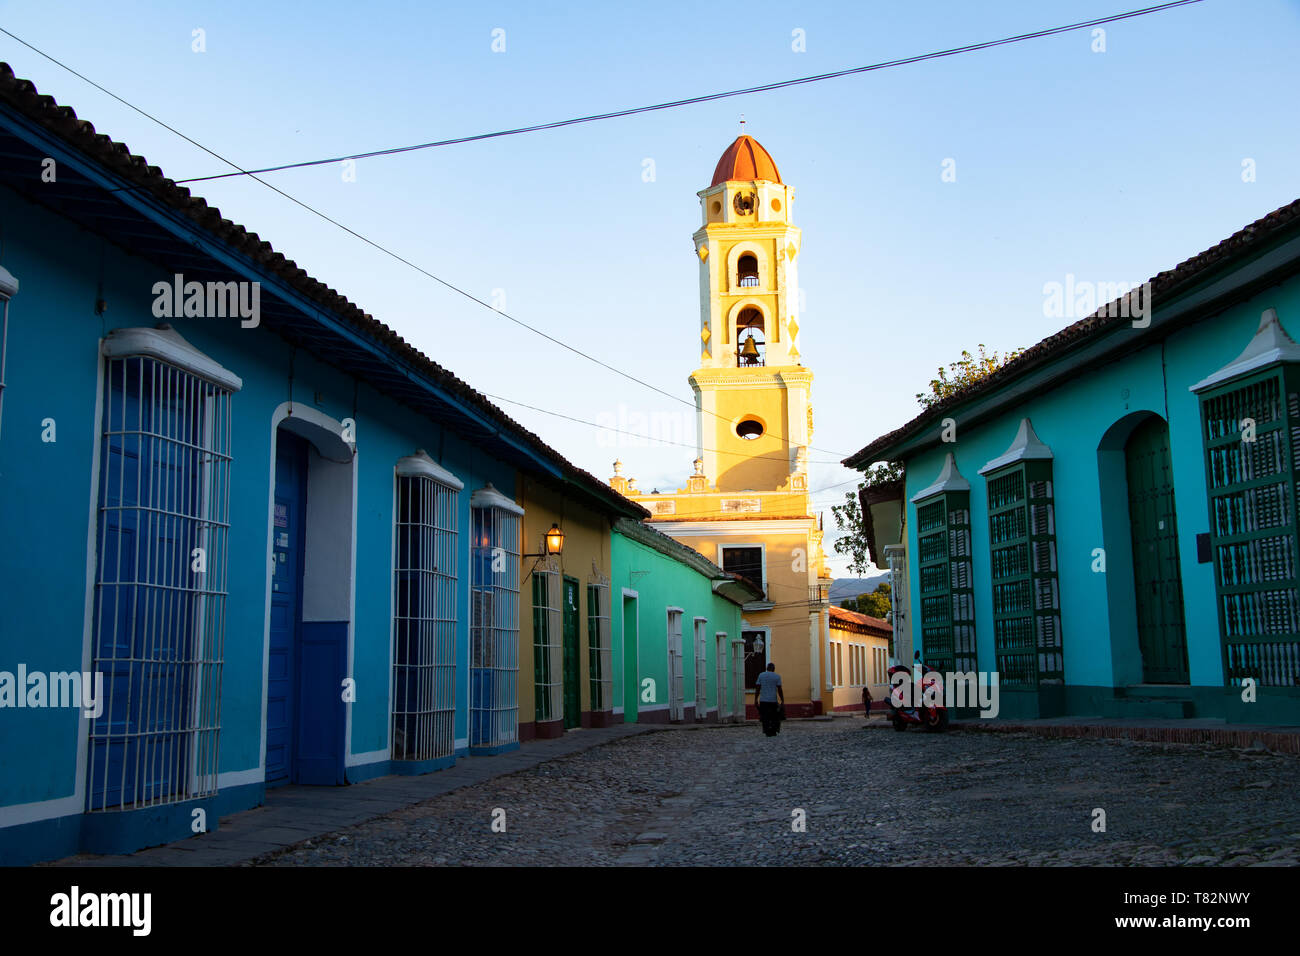 Street view of old town of Trinidad with colorful houses, Cuba Stock Photo